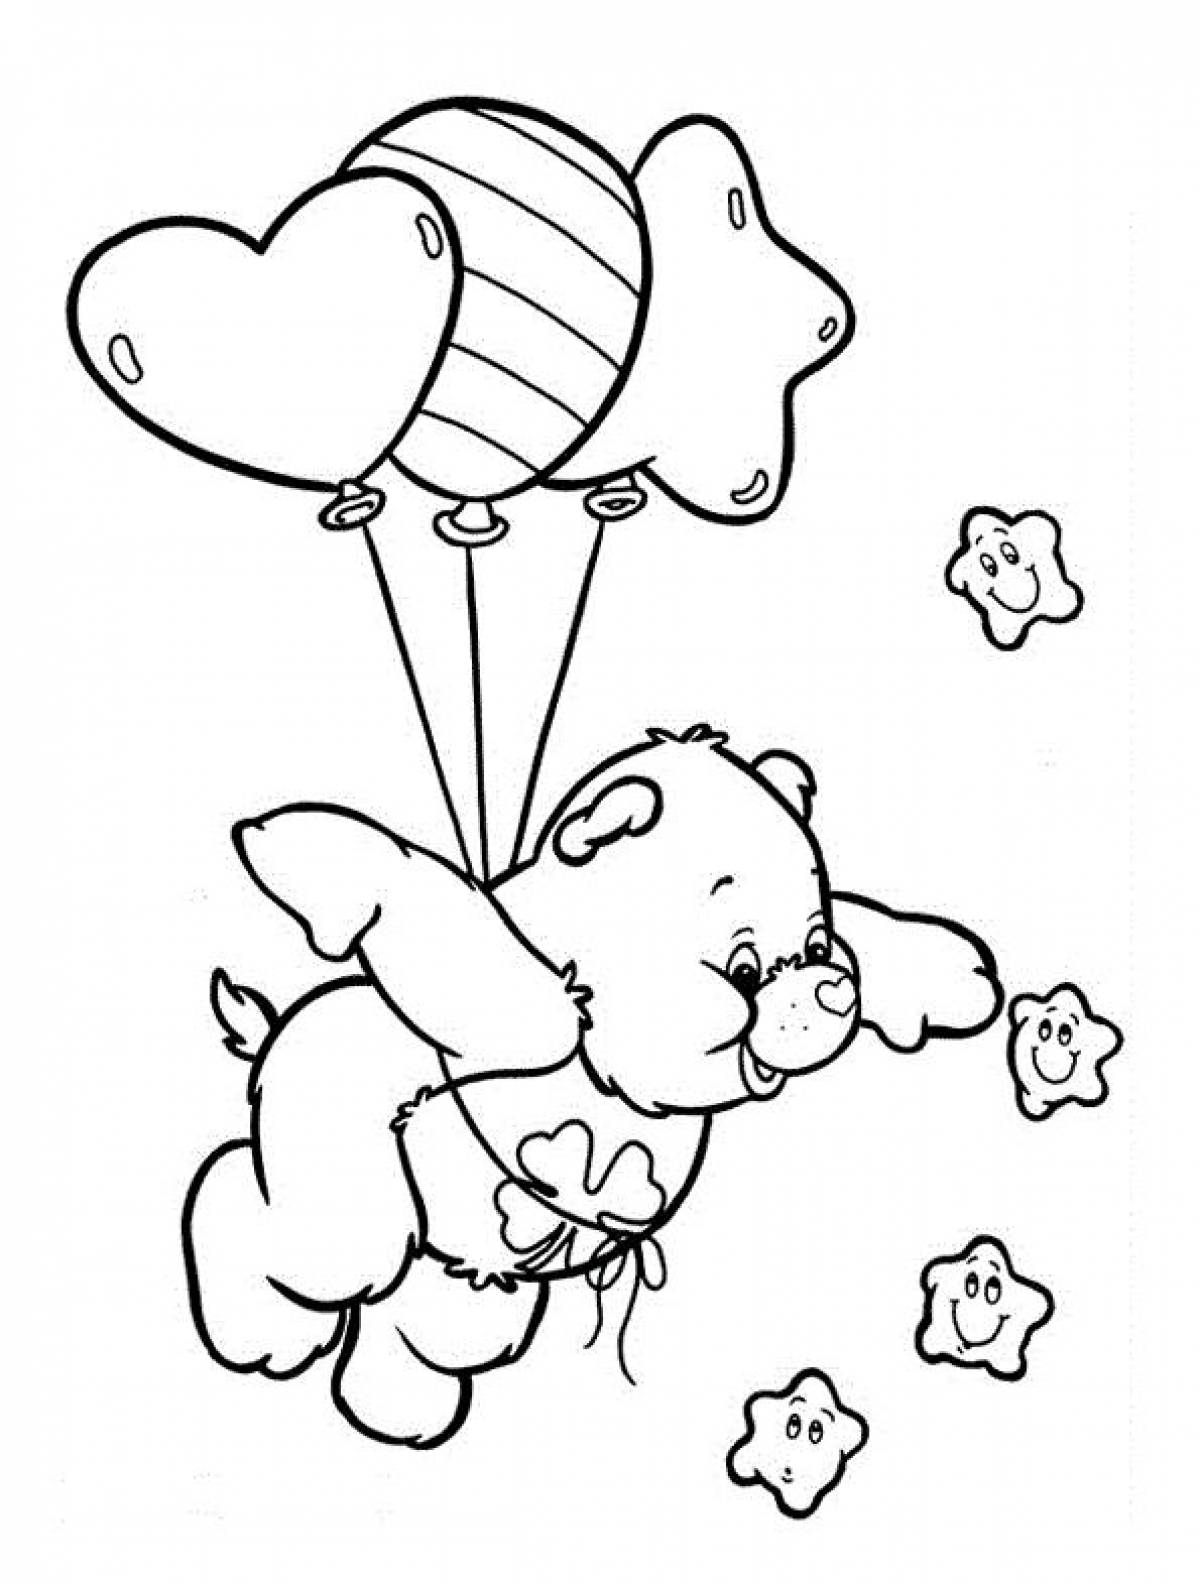 The bear is flying on a balloon